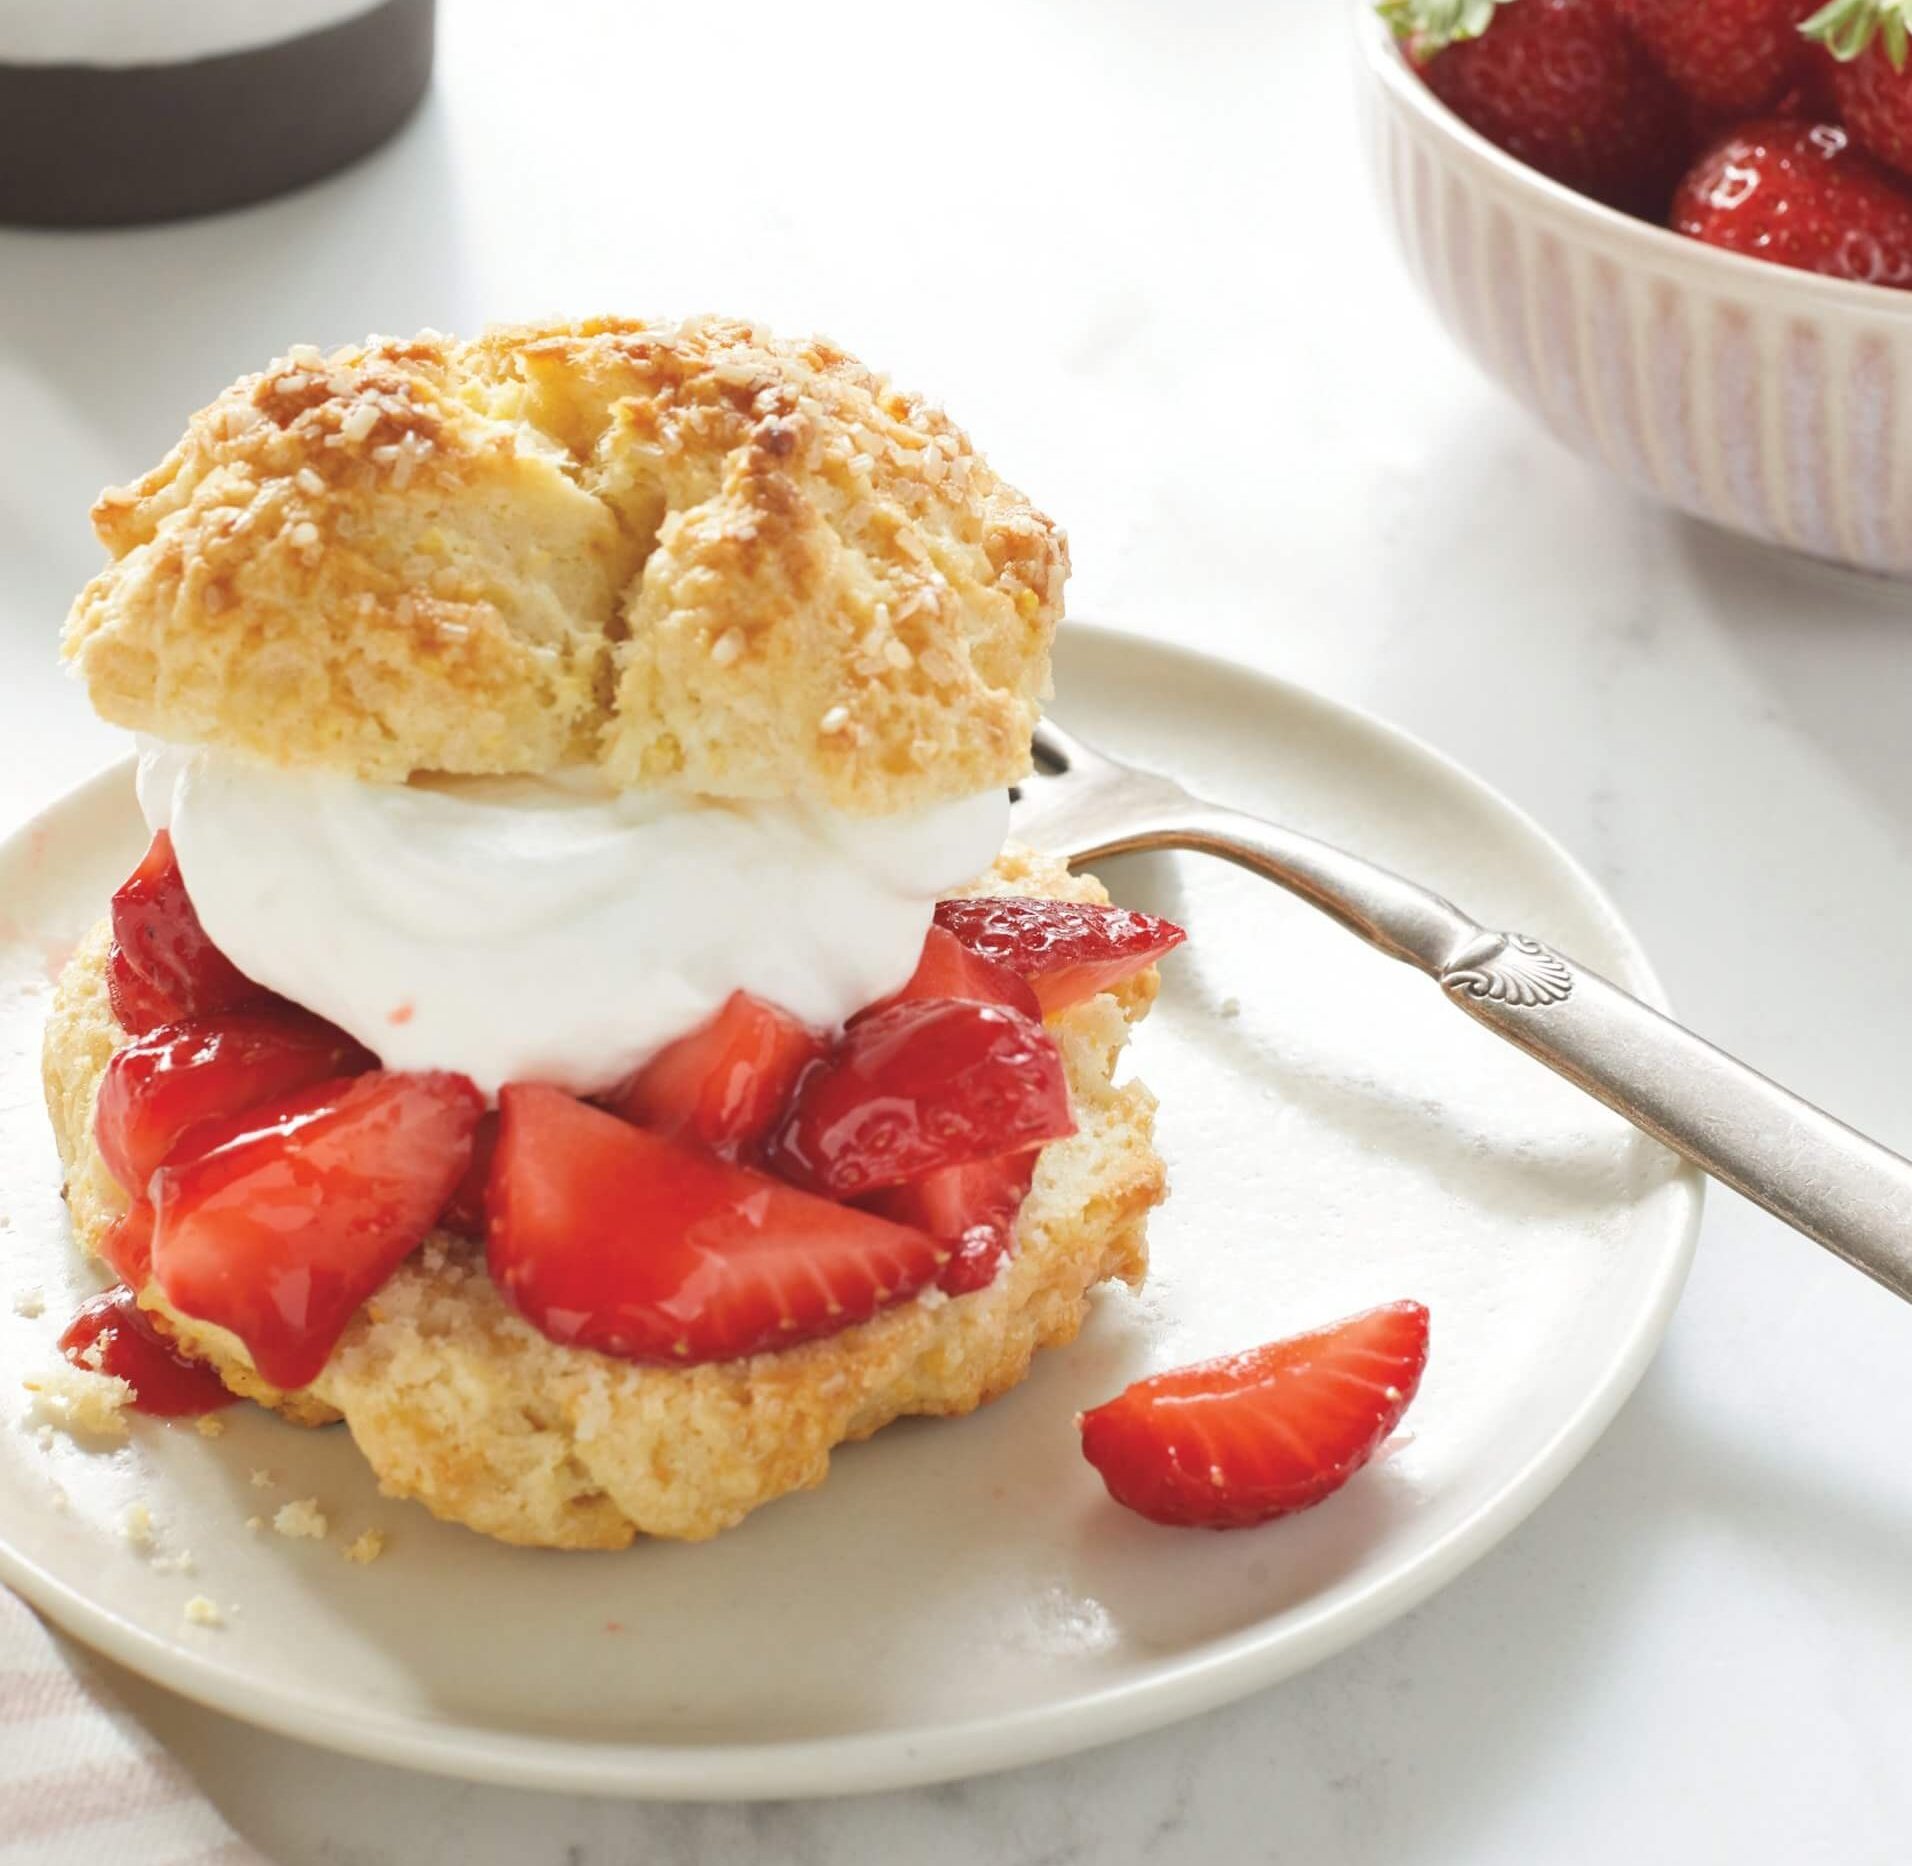 A white plate with a strawberry shortcake and more servings visible in the background.